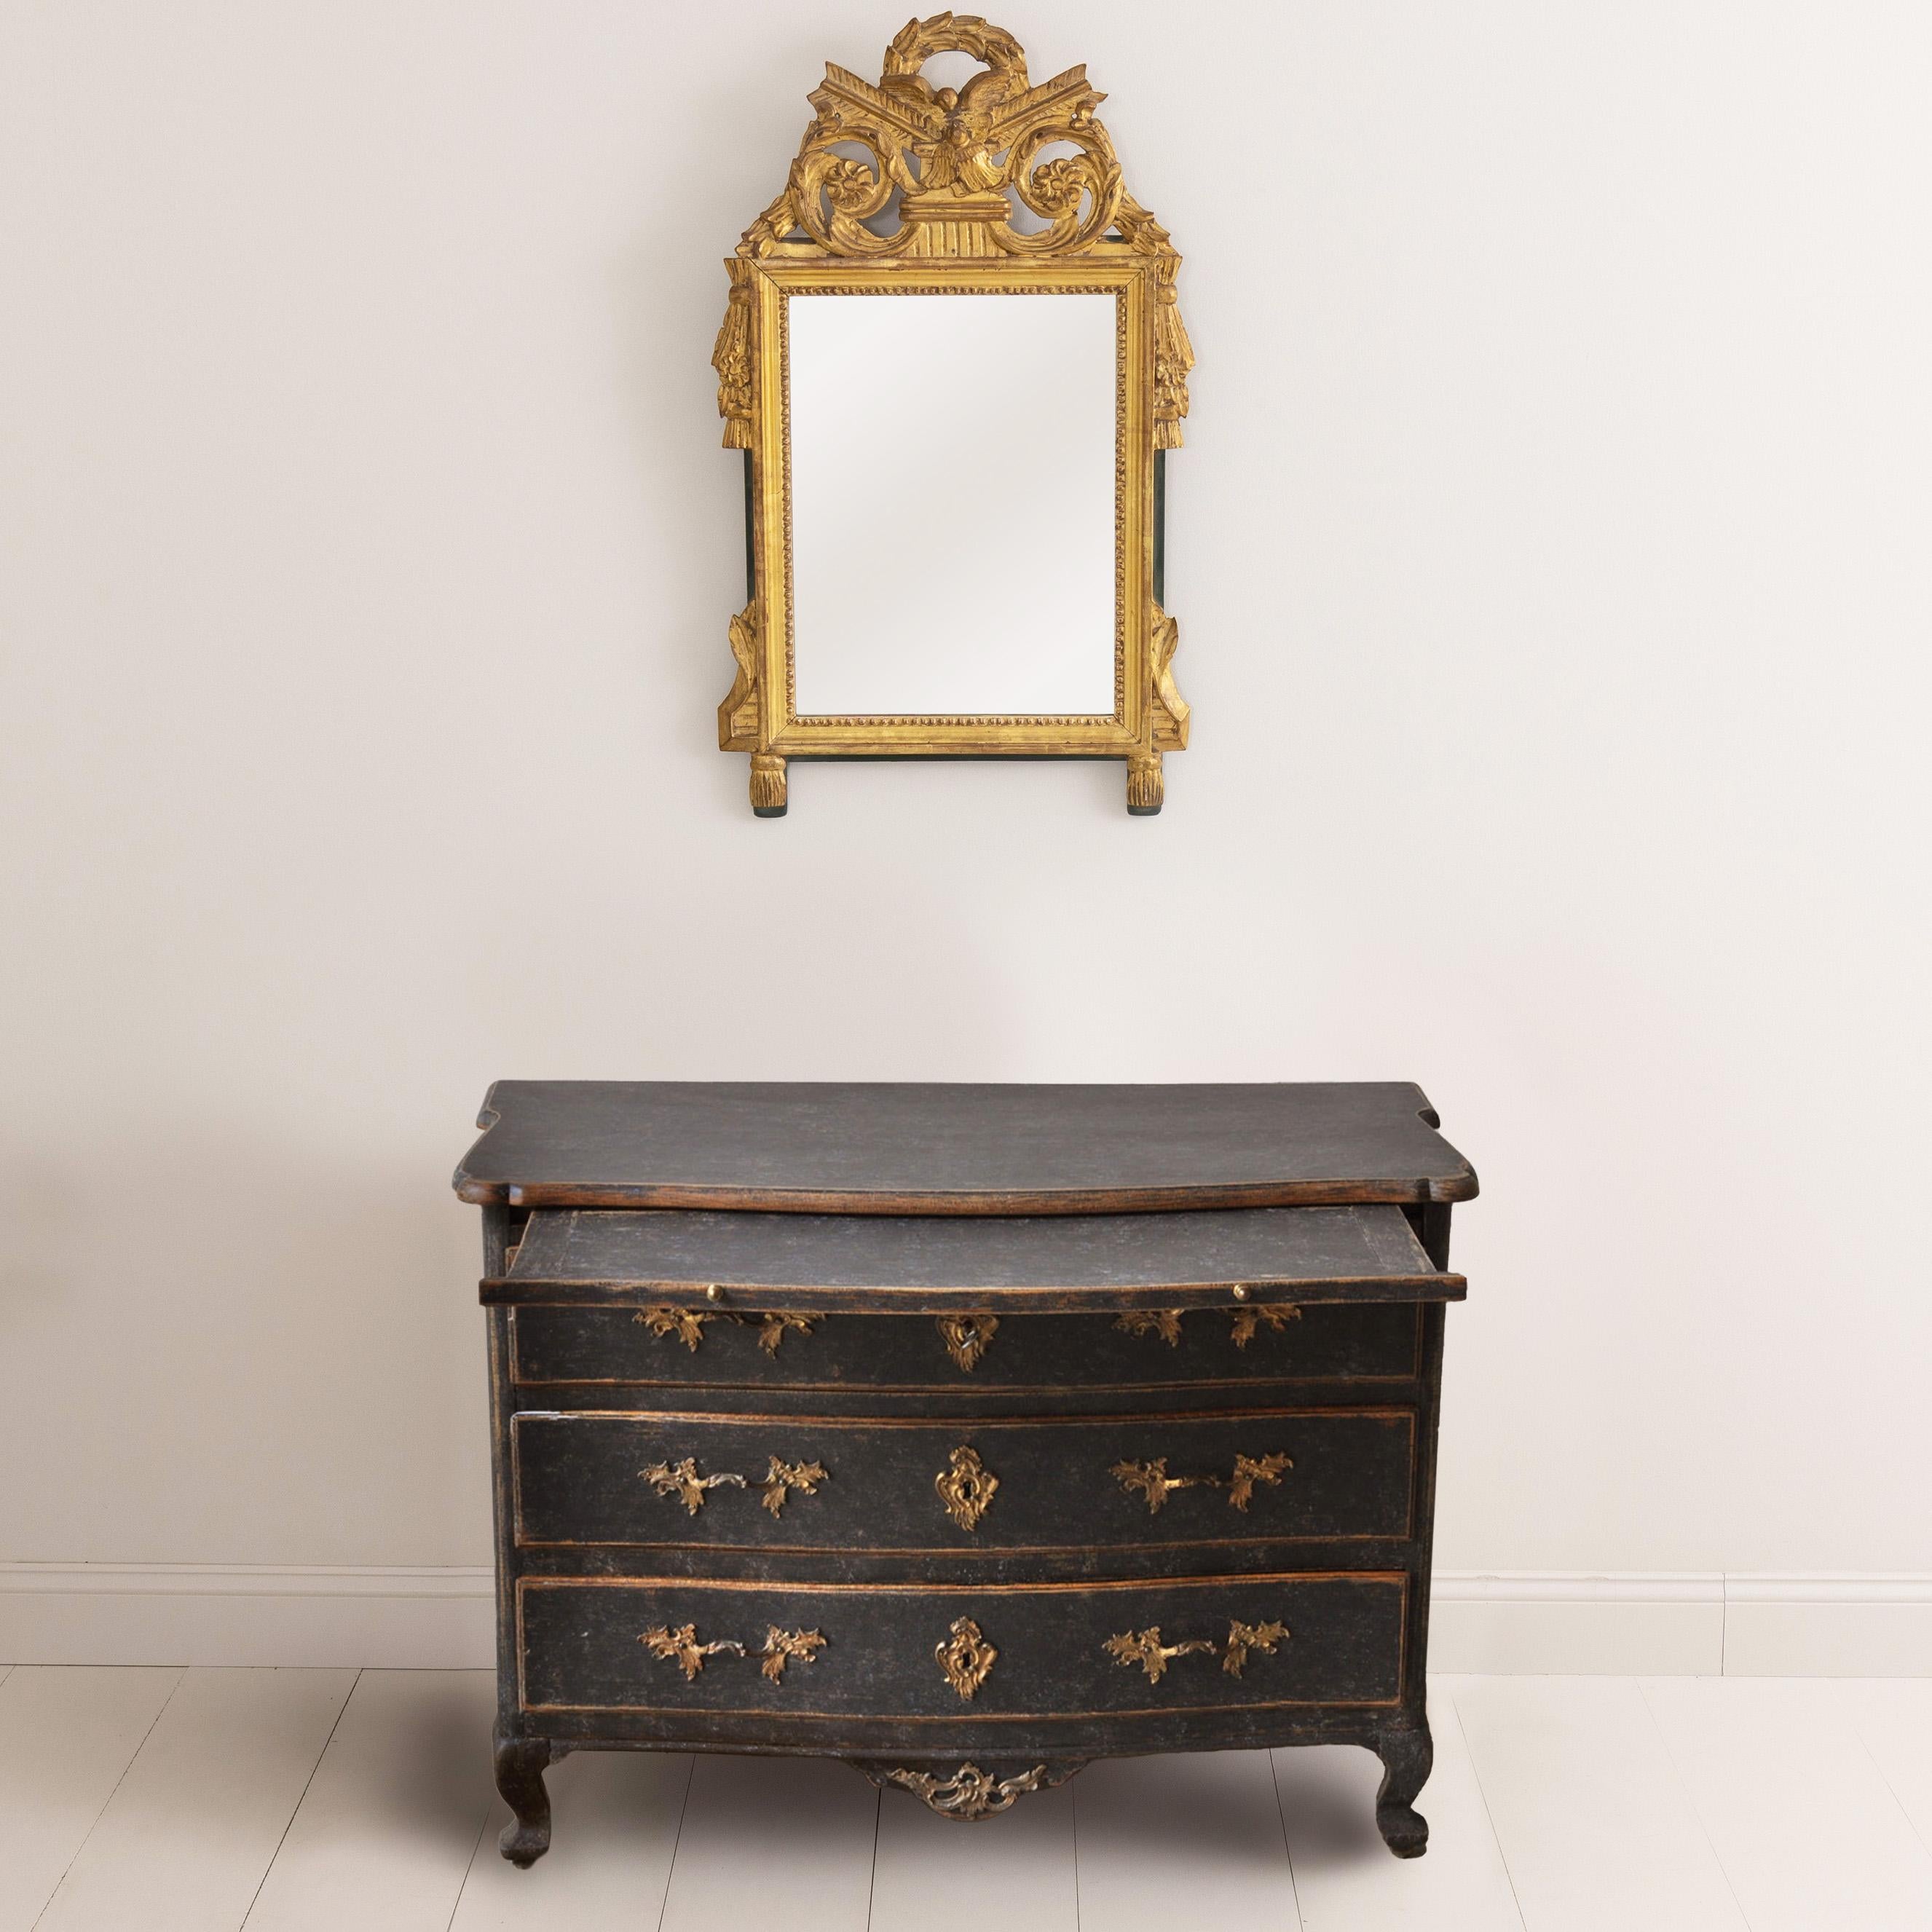 18th C. Swedish Rococo Period Black Painted Commode with Original Brass Hardware In Excellent Condition For Sale In Wichita, KS